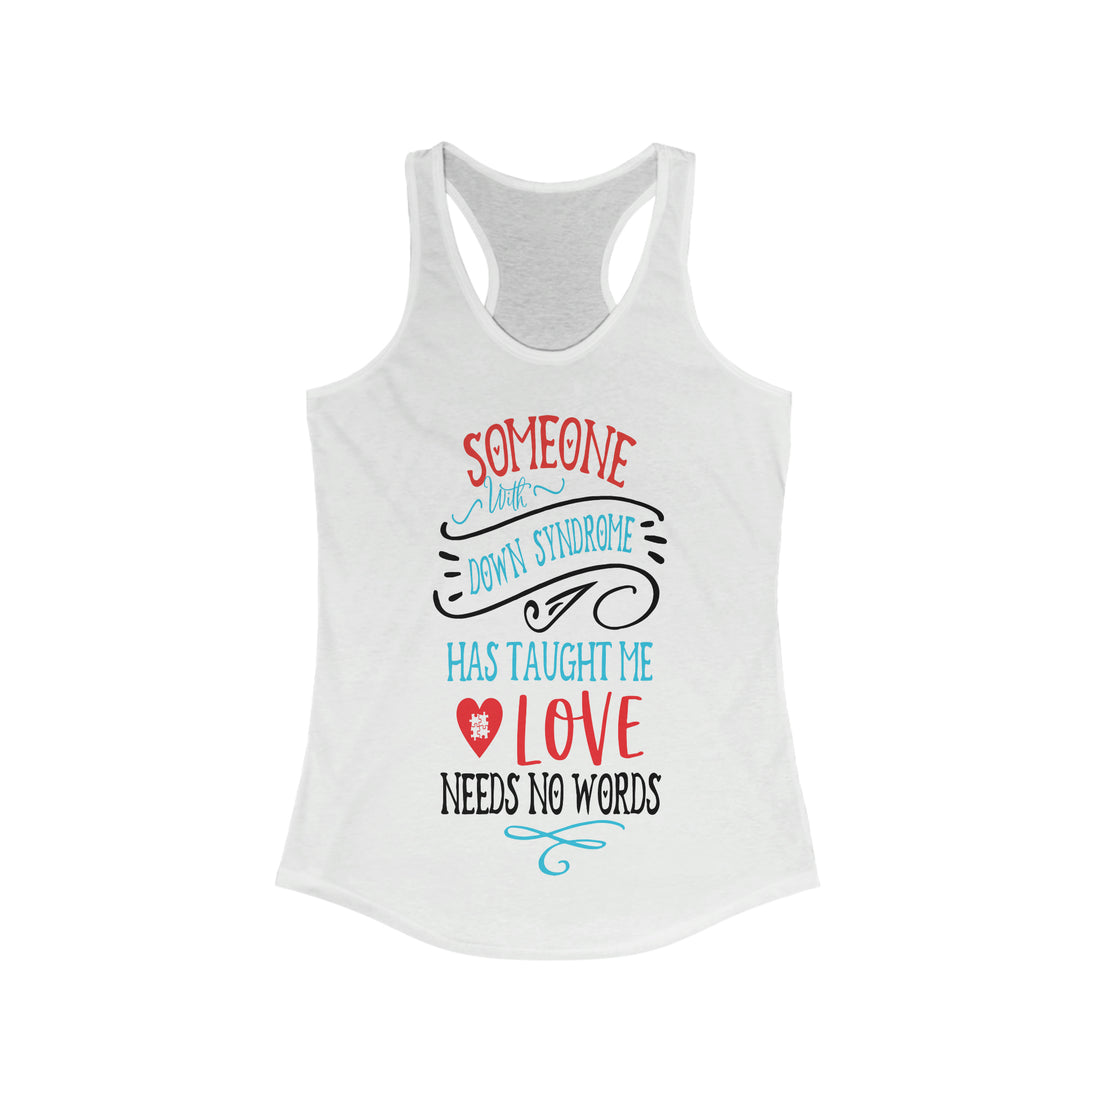 Someone with Down Syndrome Has Taught Me Love Needs No Words - Racerback Tank Top